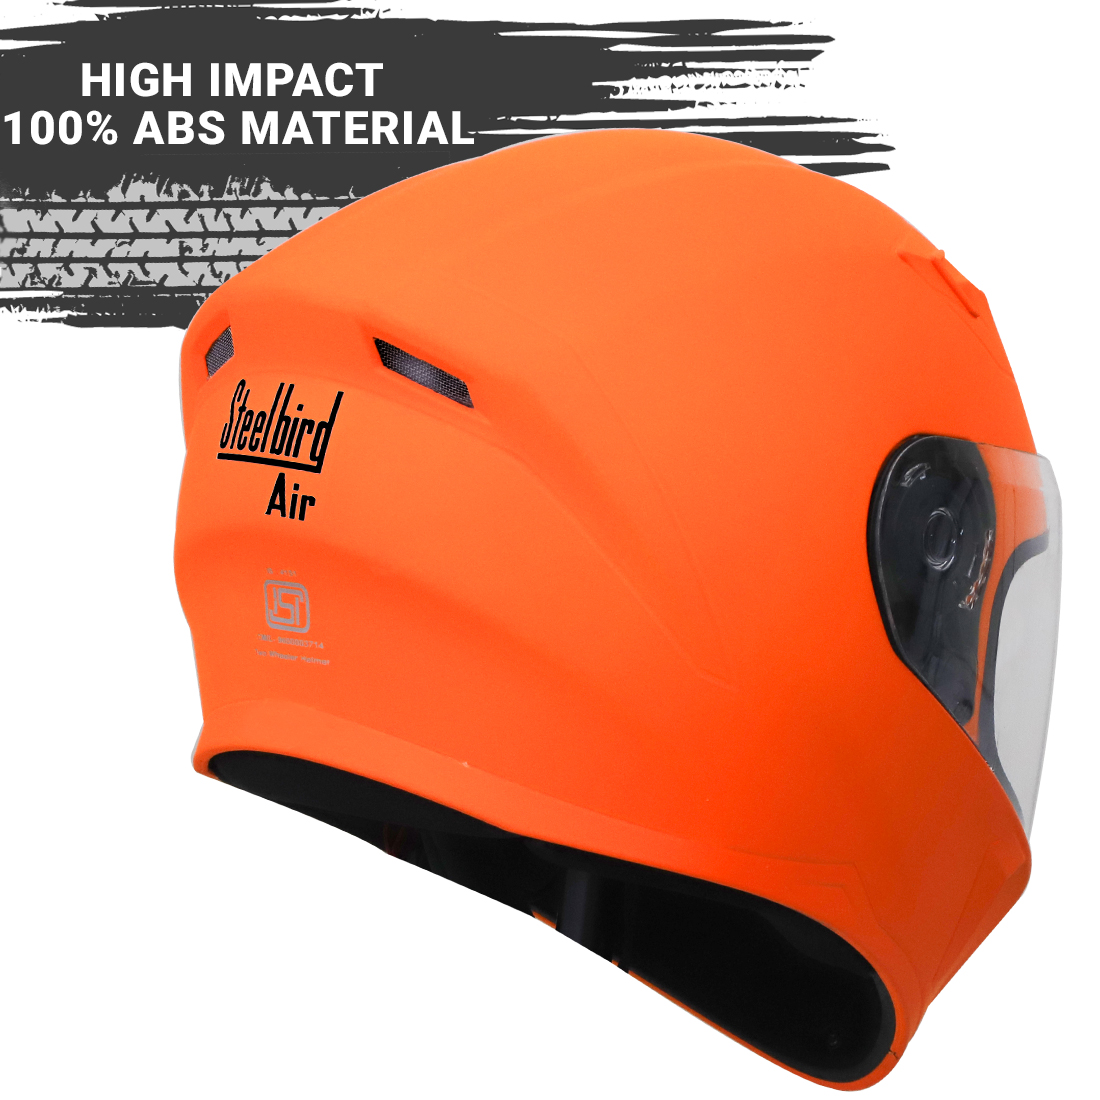 Steelbird SBA-21 GT Full Face ISI Certified Helmet With Inner Chrome Silver Sun Shield And Outer Clear Visor (Glossy Fluo Orange)